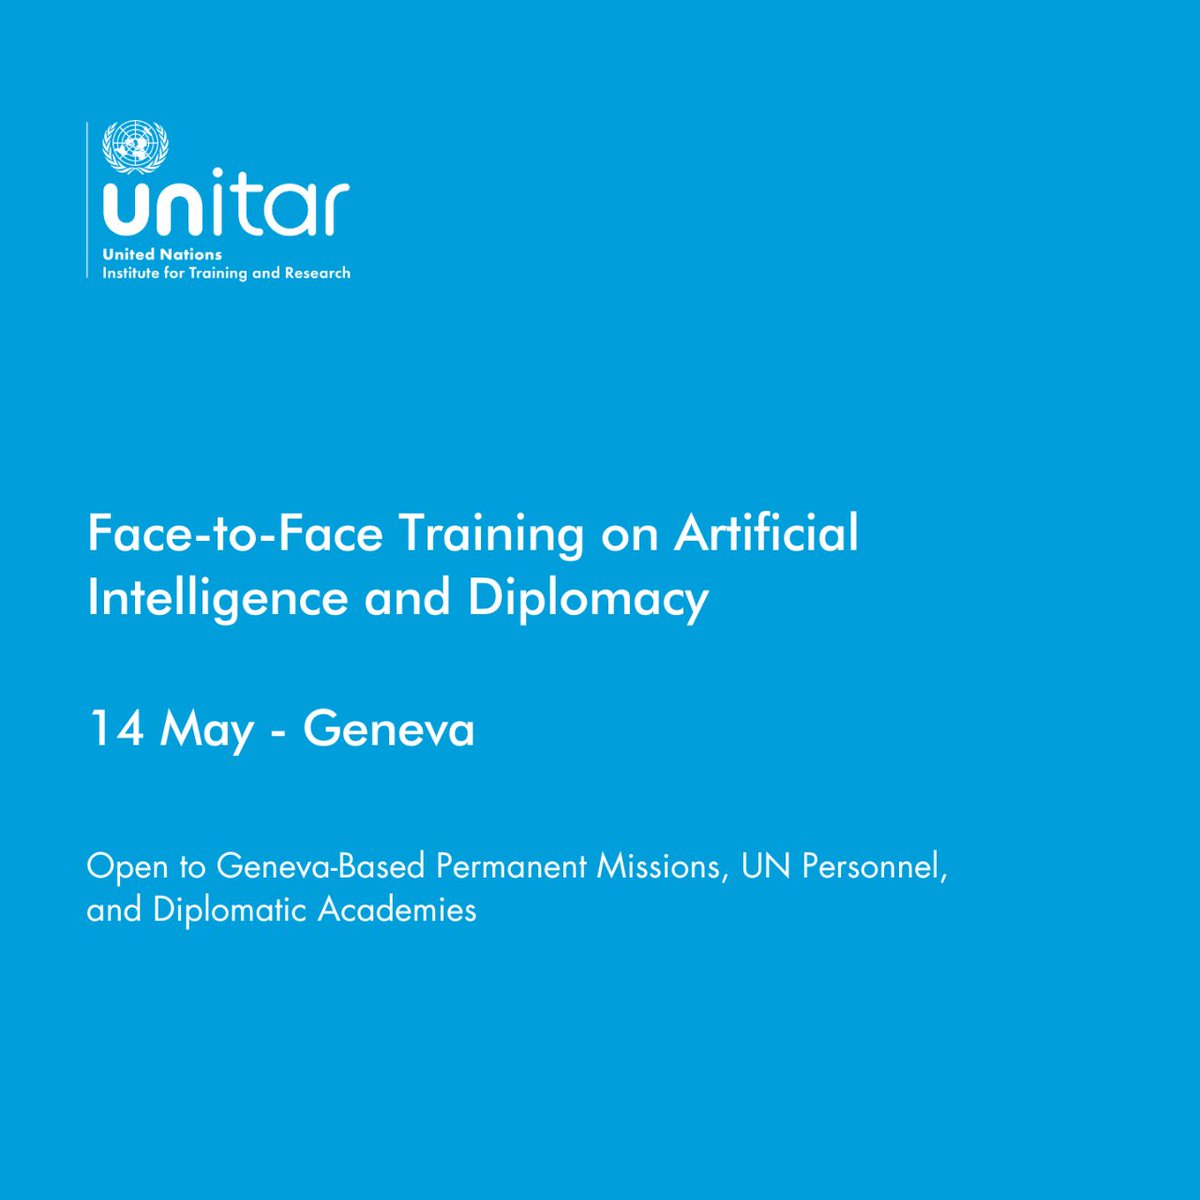 UNITAR will be hosting an AI training on 14 May open to Geneva-based permanent missions, UN personnel, and diplomatic academies, who are invited to apply via the following link: event.unitar.org/full-catalog/f… #AI #ArtificialIntelligence